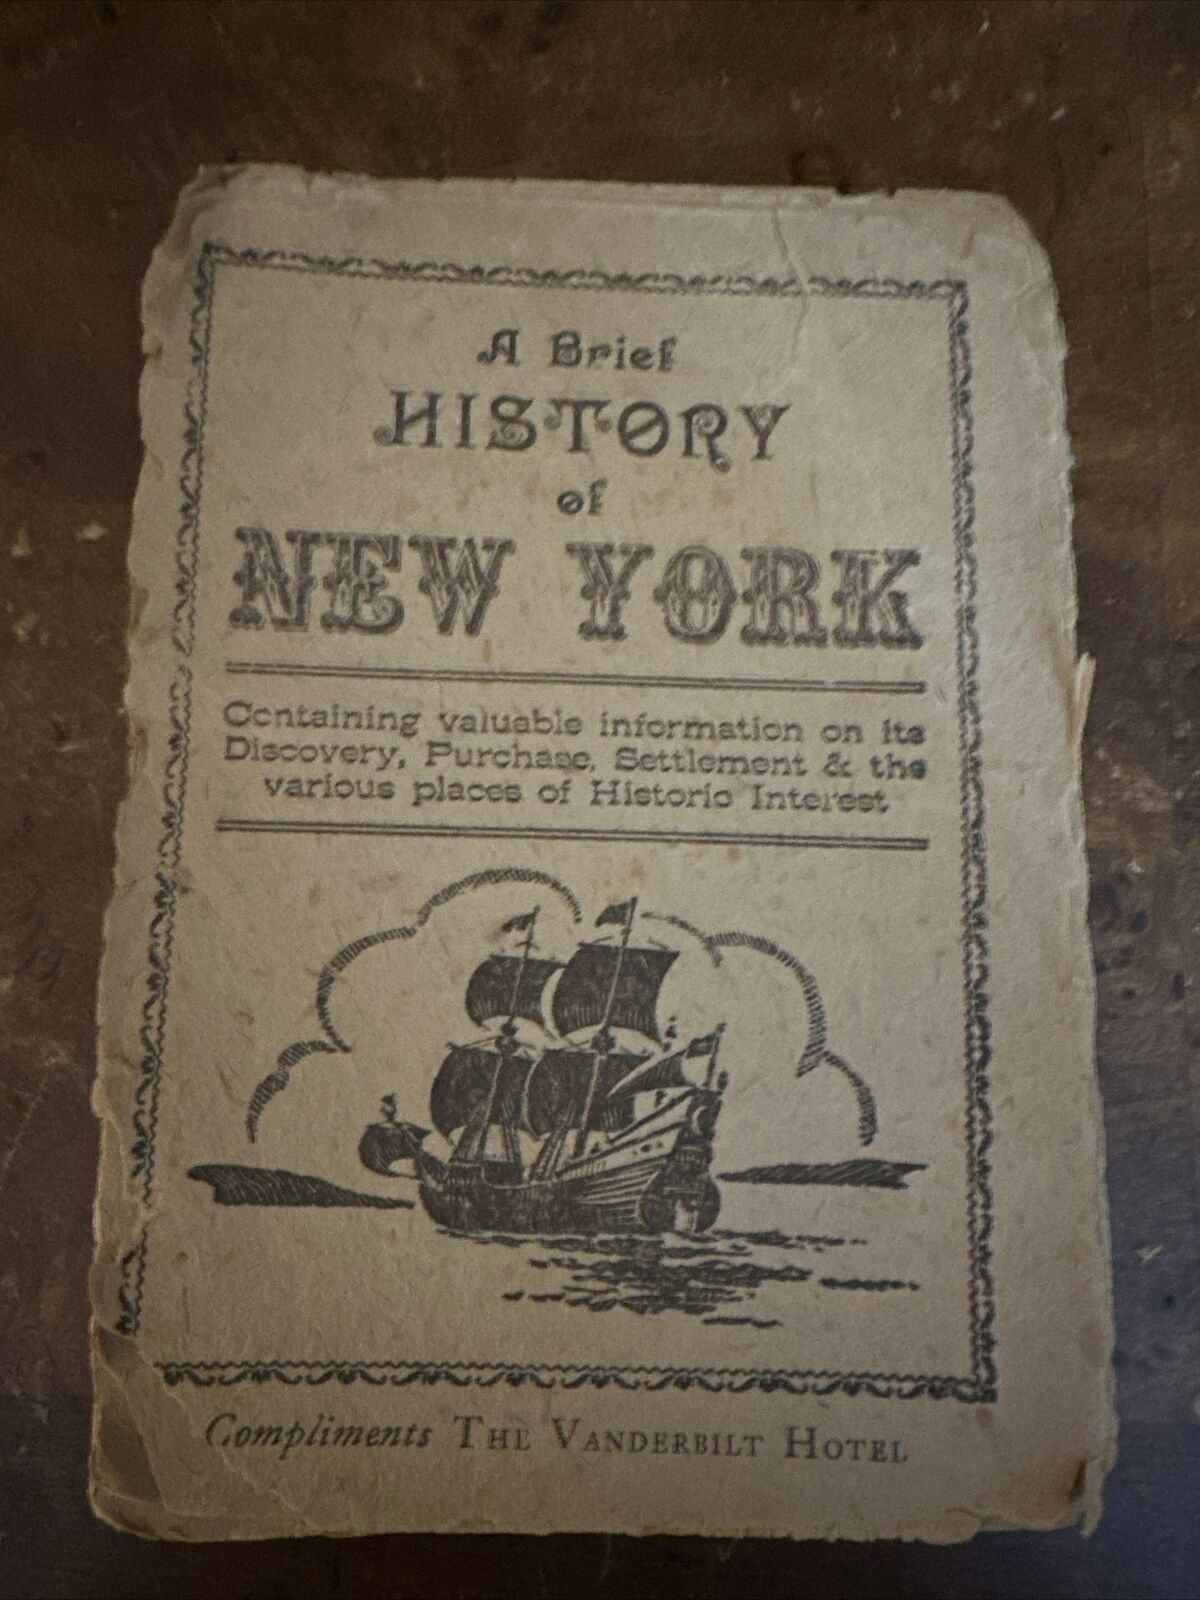 A Brief History of New York 1948 Discovery Purchase Settlement Ships Immediately